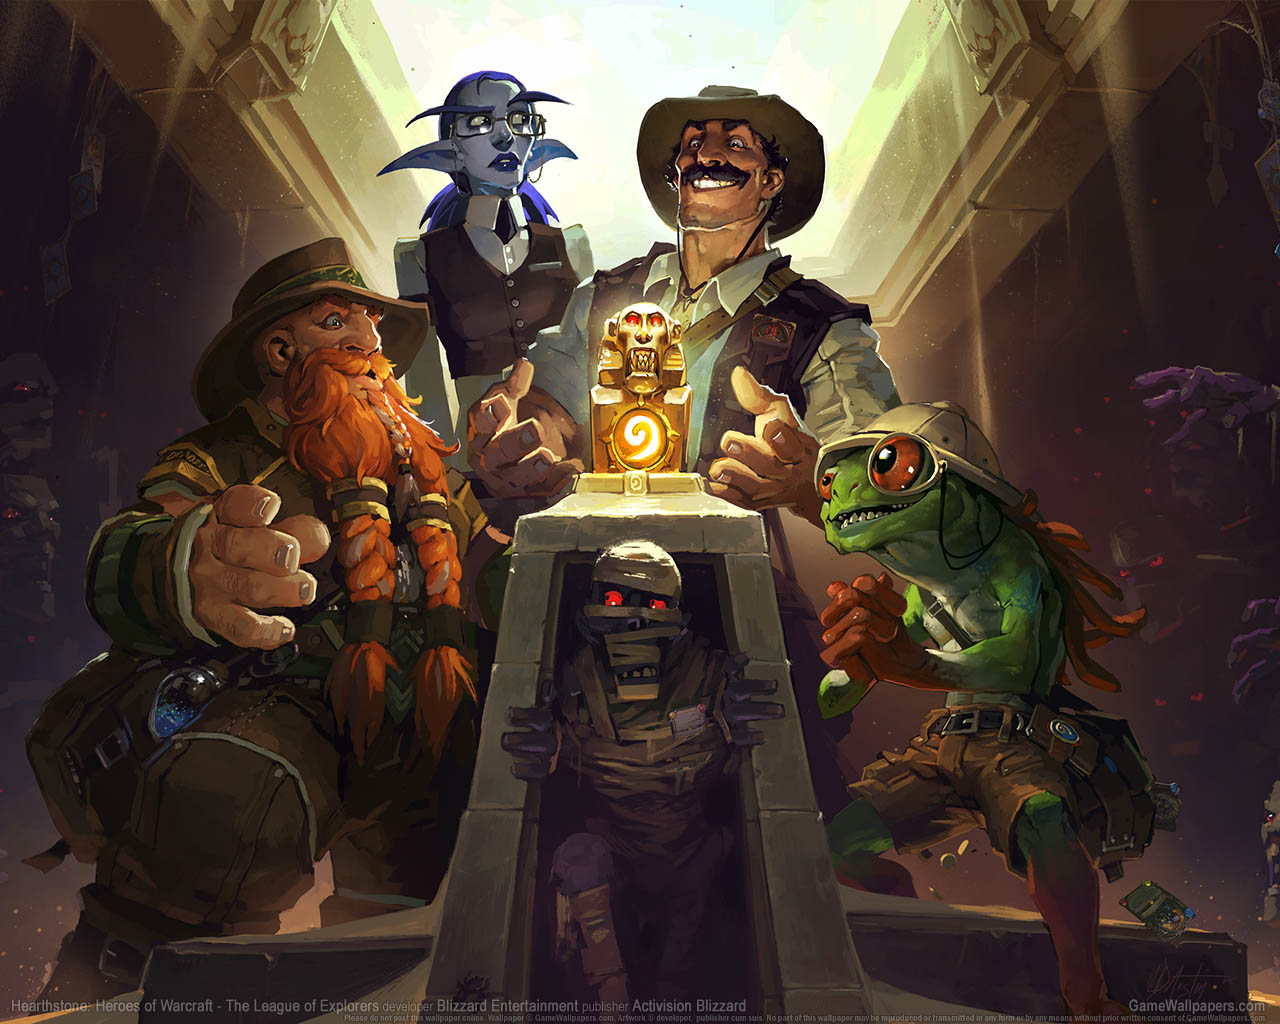 Hearthstone: Heroes of Warcraft - The League of Explorers fond d'cran 01 1280x1024